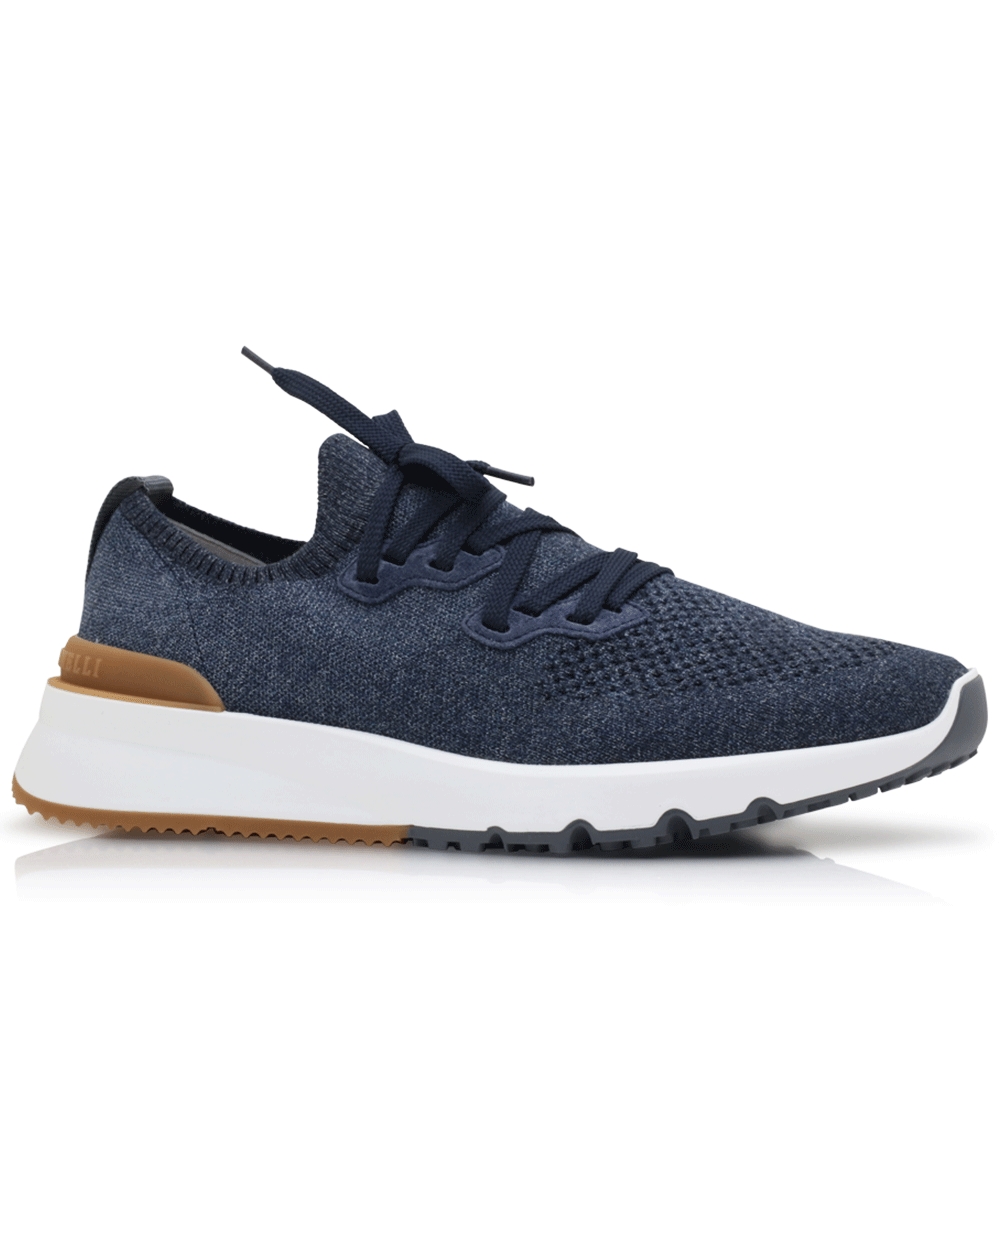 Cucinelli Knit Sneaker in Navy and Grey